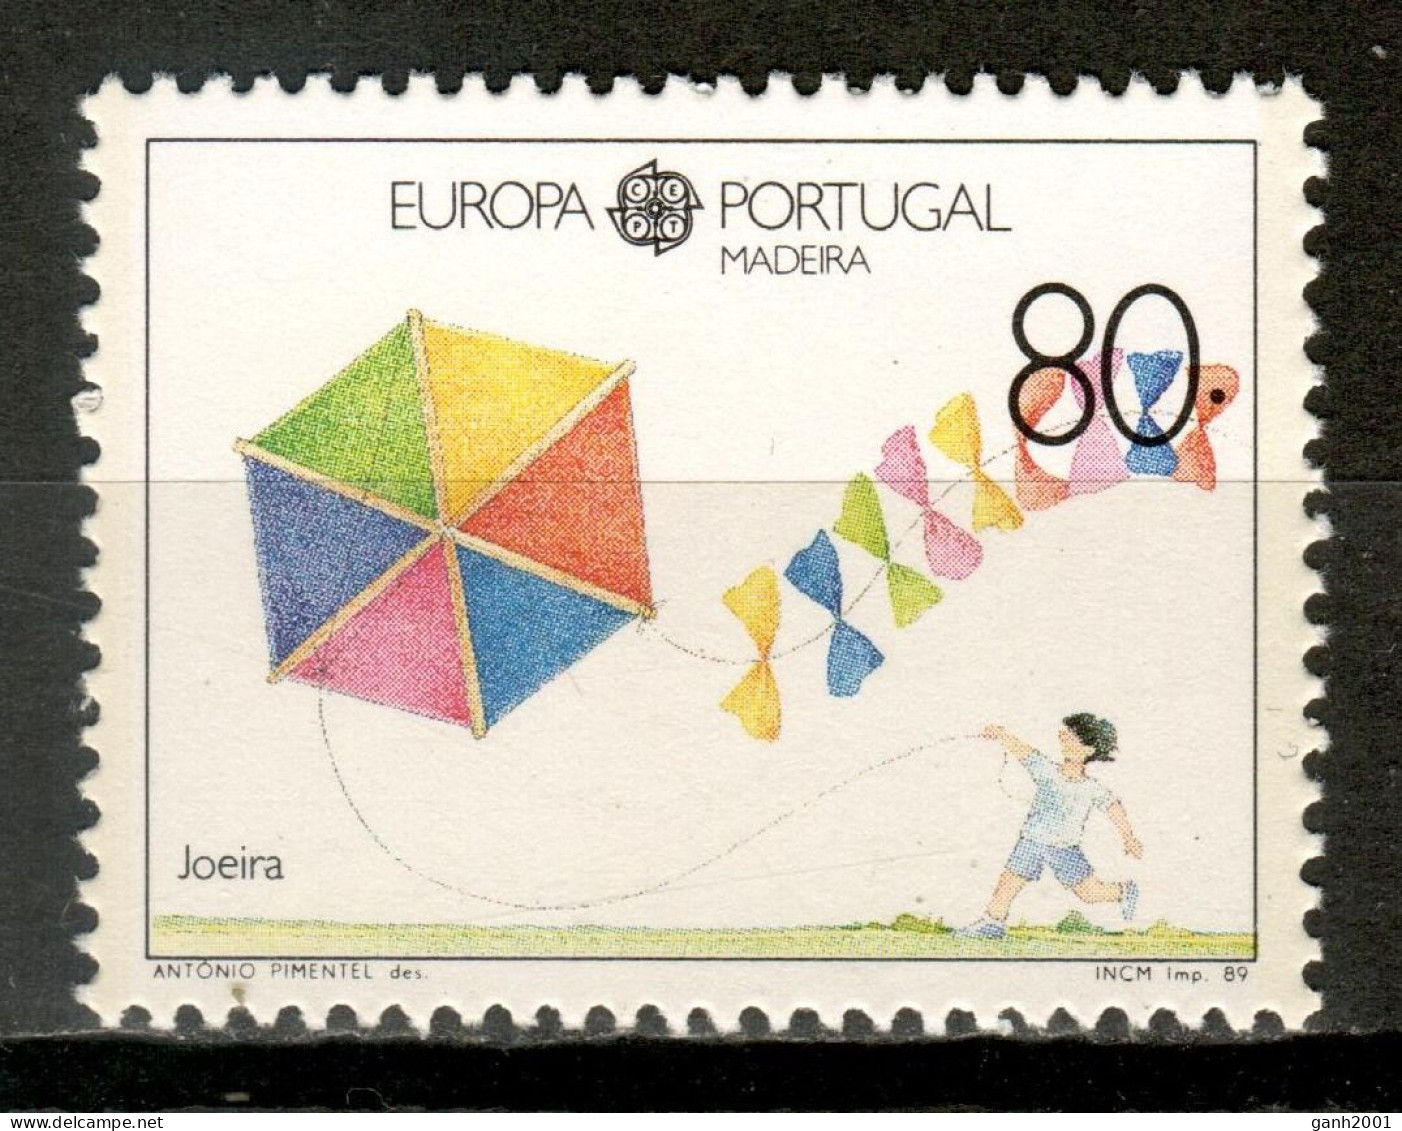 Madeira 1989 Portugal / Europa CEPT Children's Games & Toys MNH Juegos Infantiles Y Juguetes Kinderspiele / Lm26  10-24 - 1989